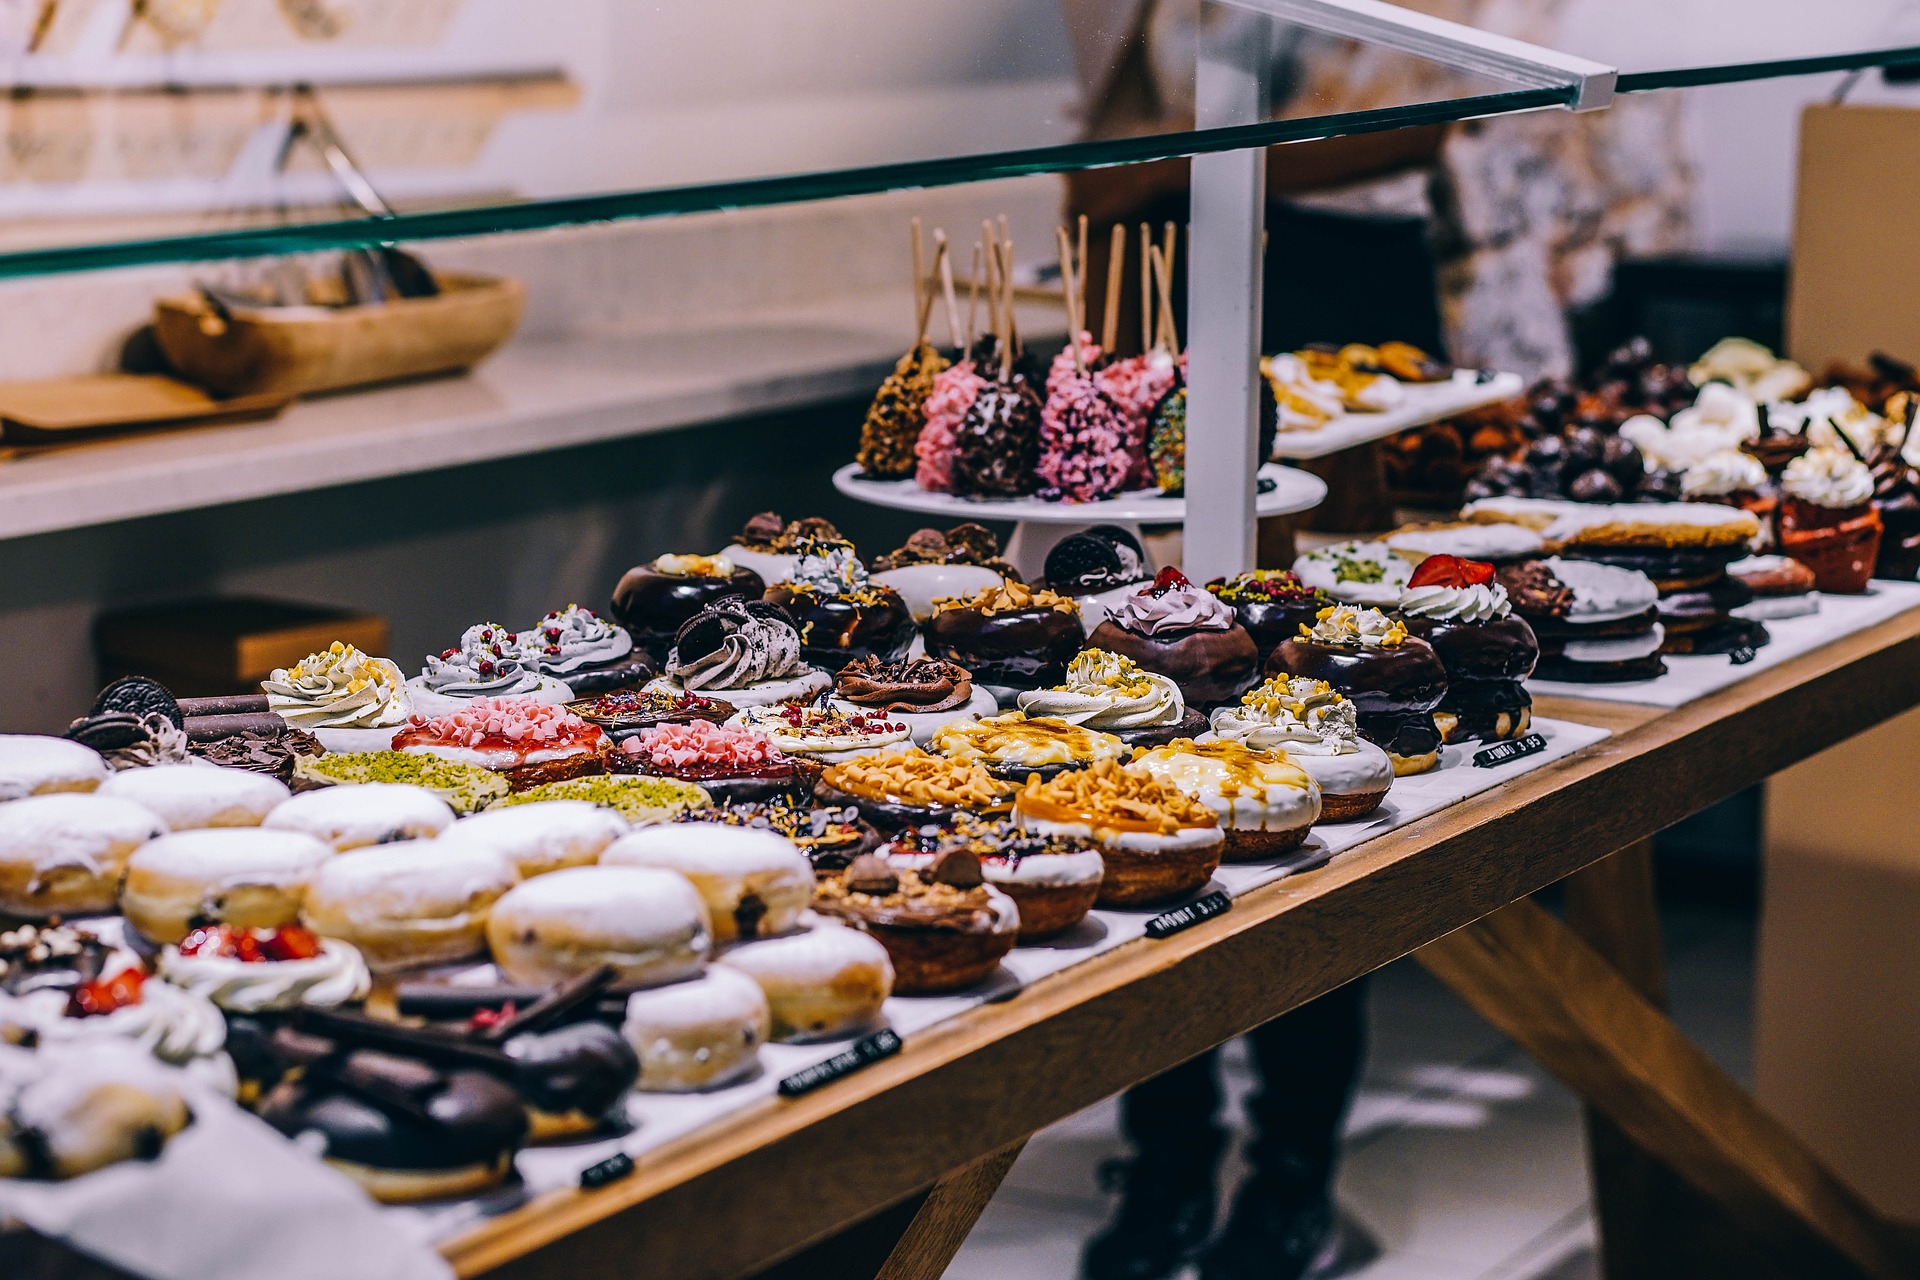 Can't Resist Sweets, Junk Food? Here's How They Alter Your Brain To Keep Wanting More